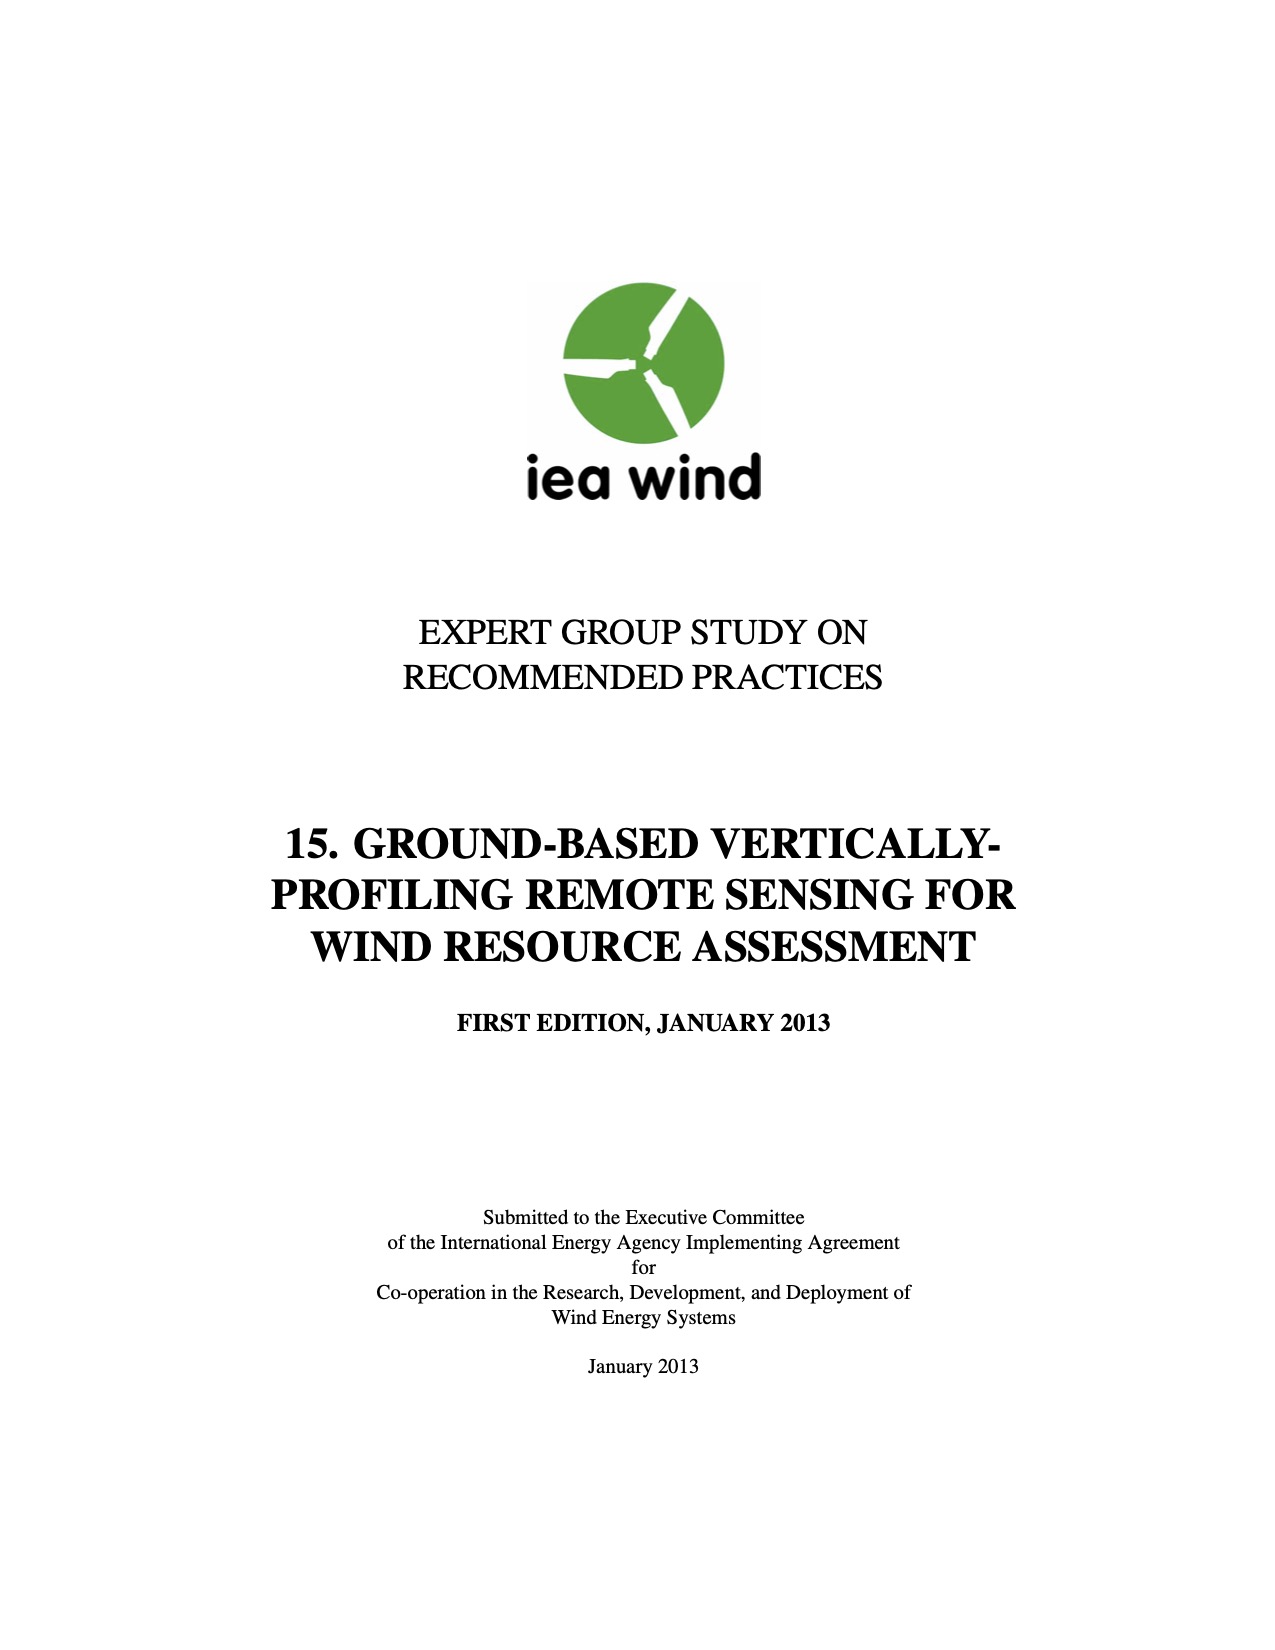 IEA Wind Recommended Practices #15